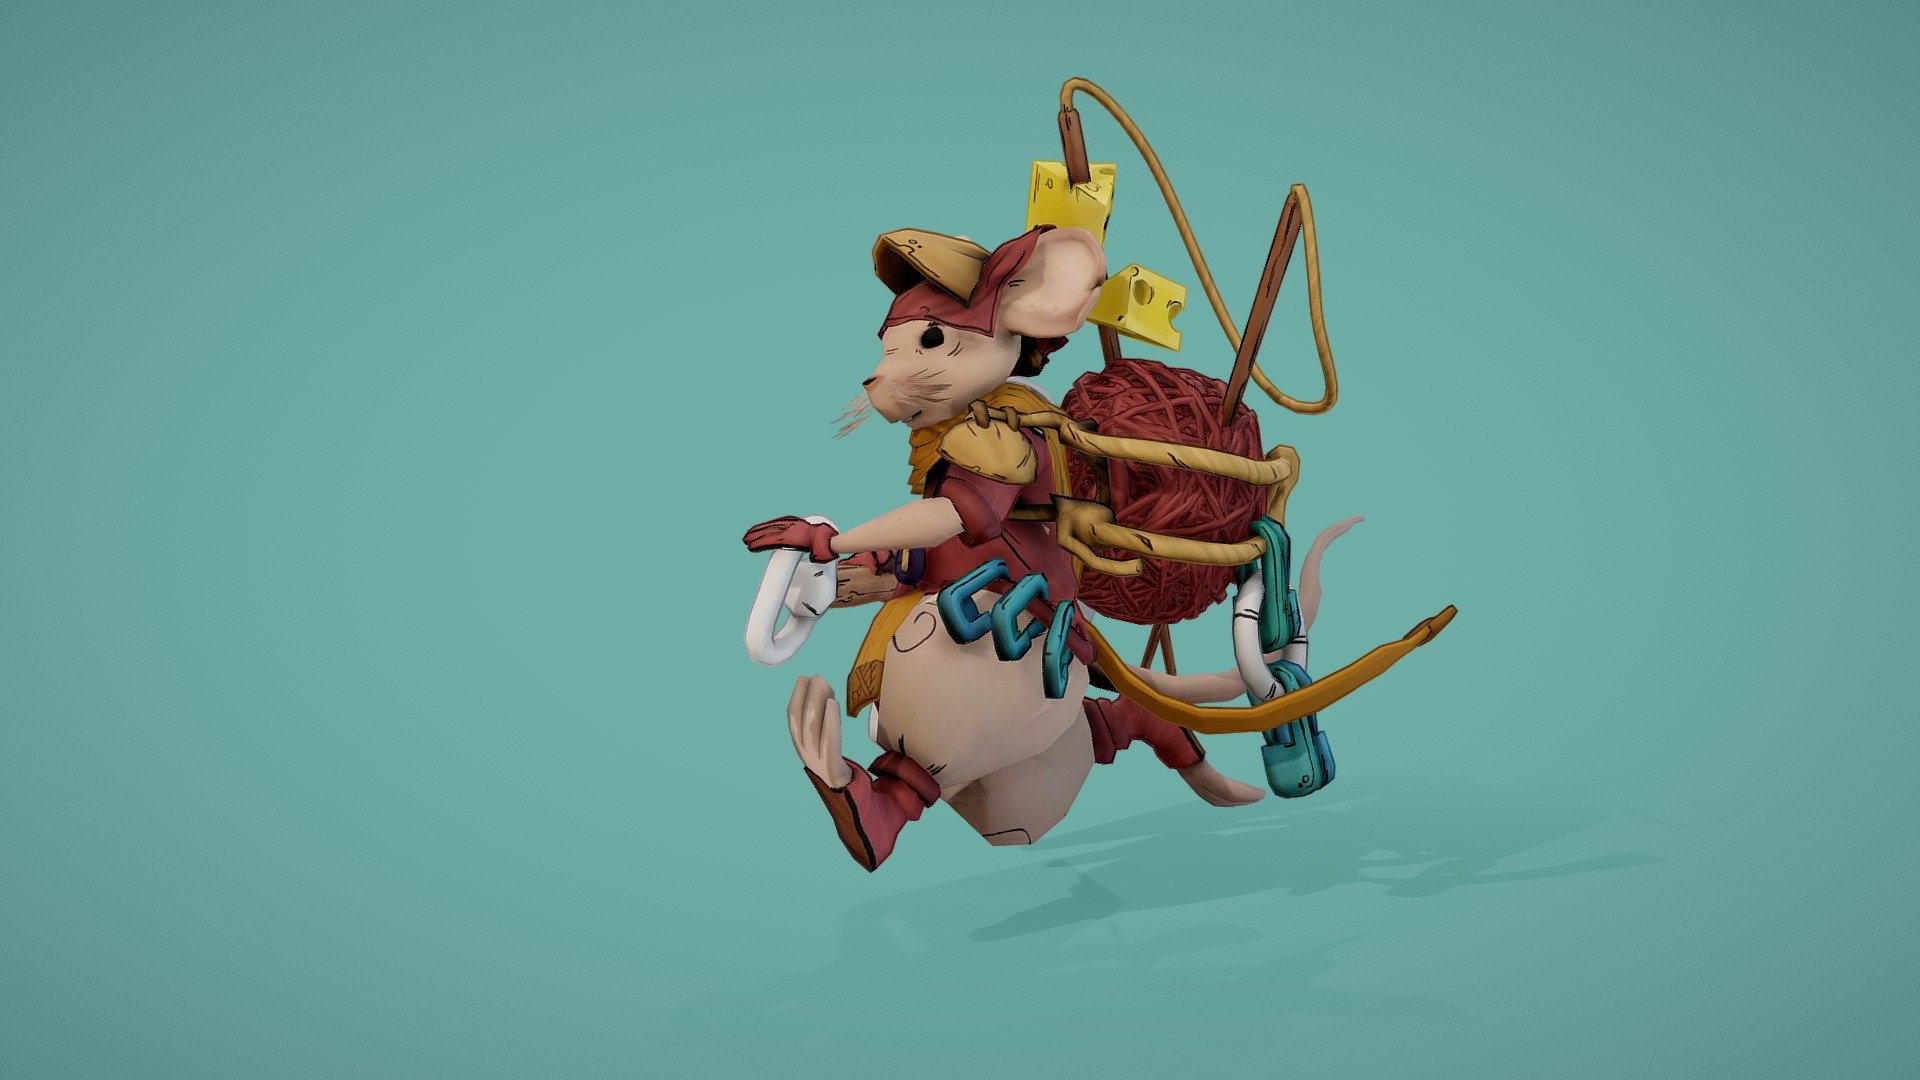 A mouse on its adventure to the finest cheese 🐭🧀⚔️

Created in Blender, textured in SubstancePainter.

Include:
Mouse with OutlineMesh (You can select the material &ldquo;name.Outline